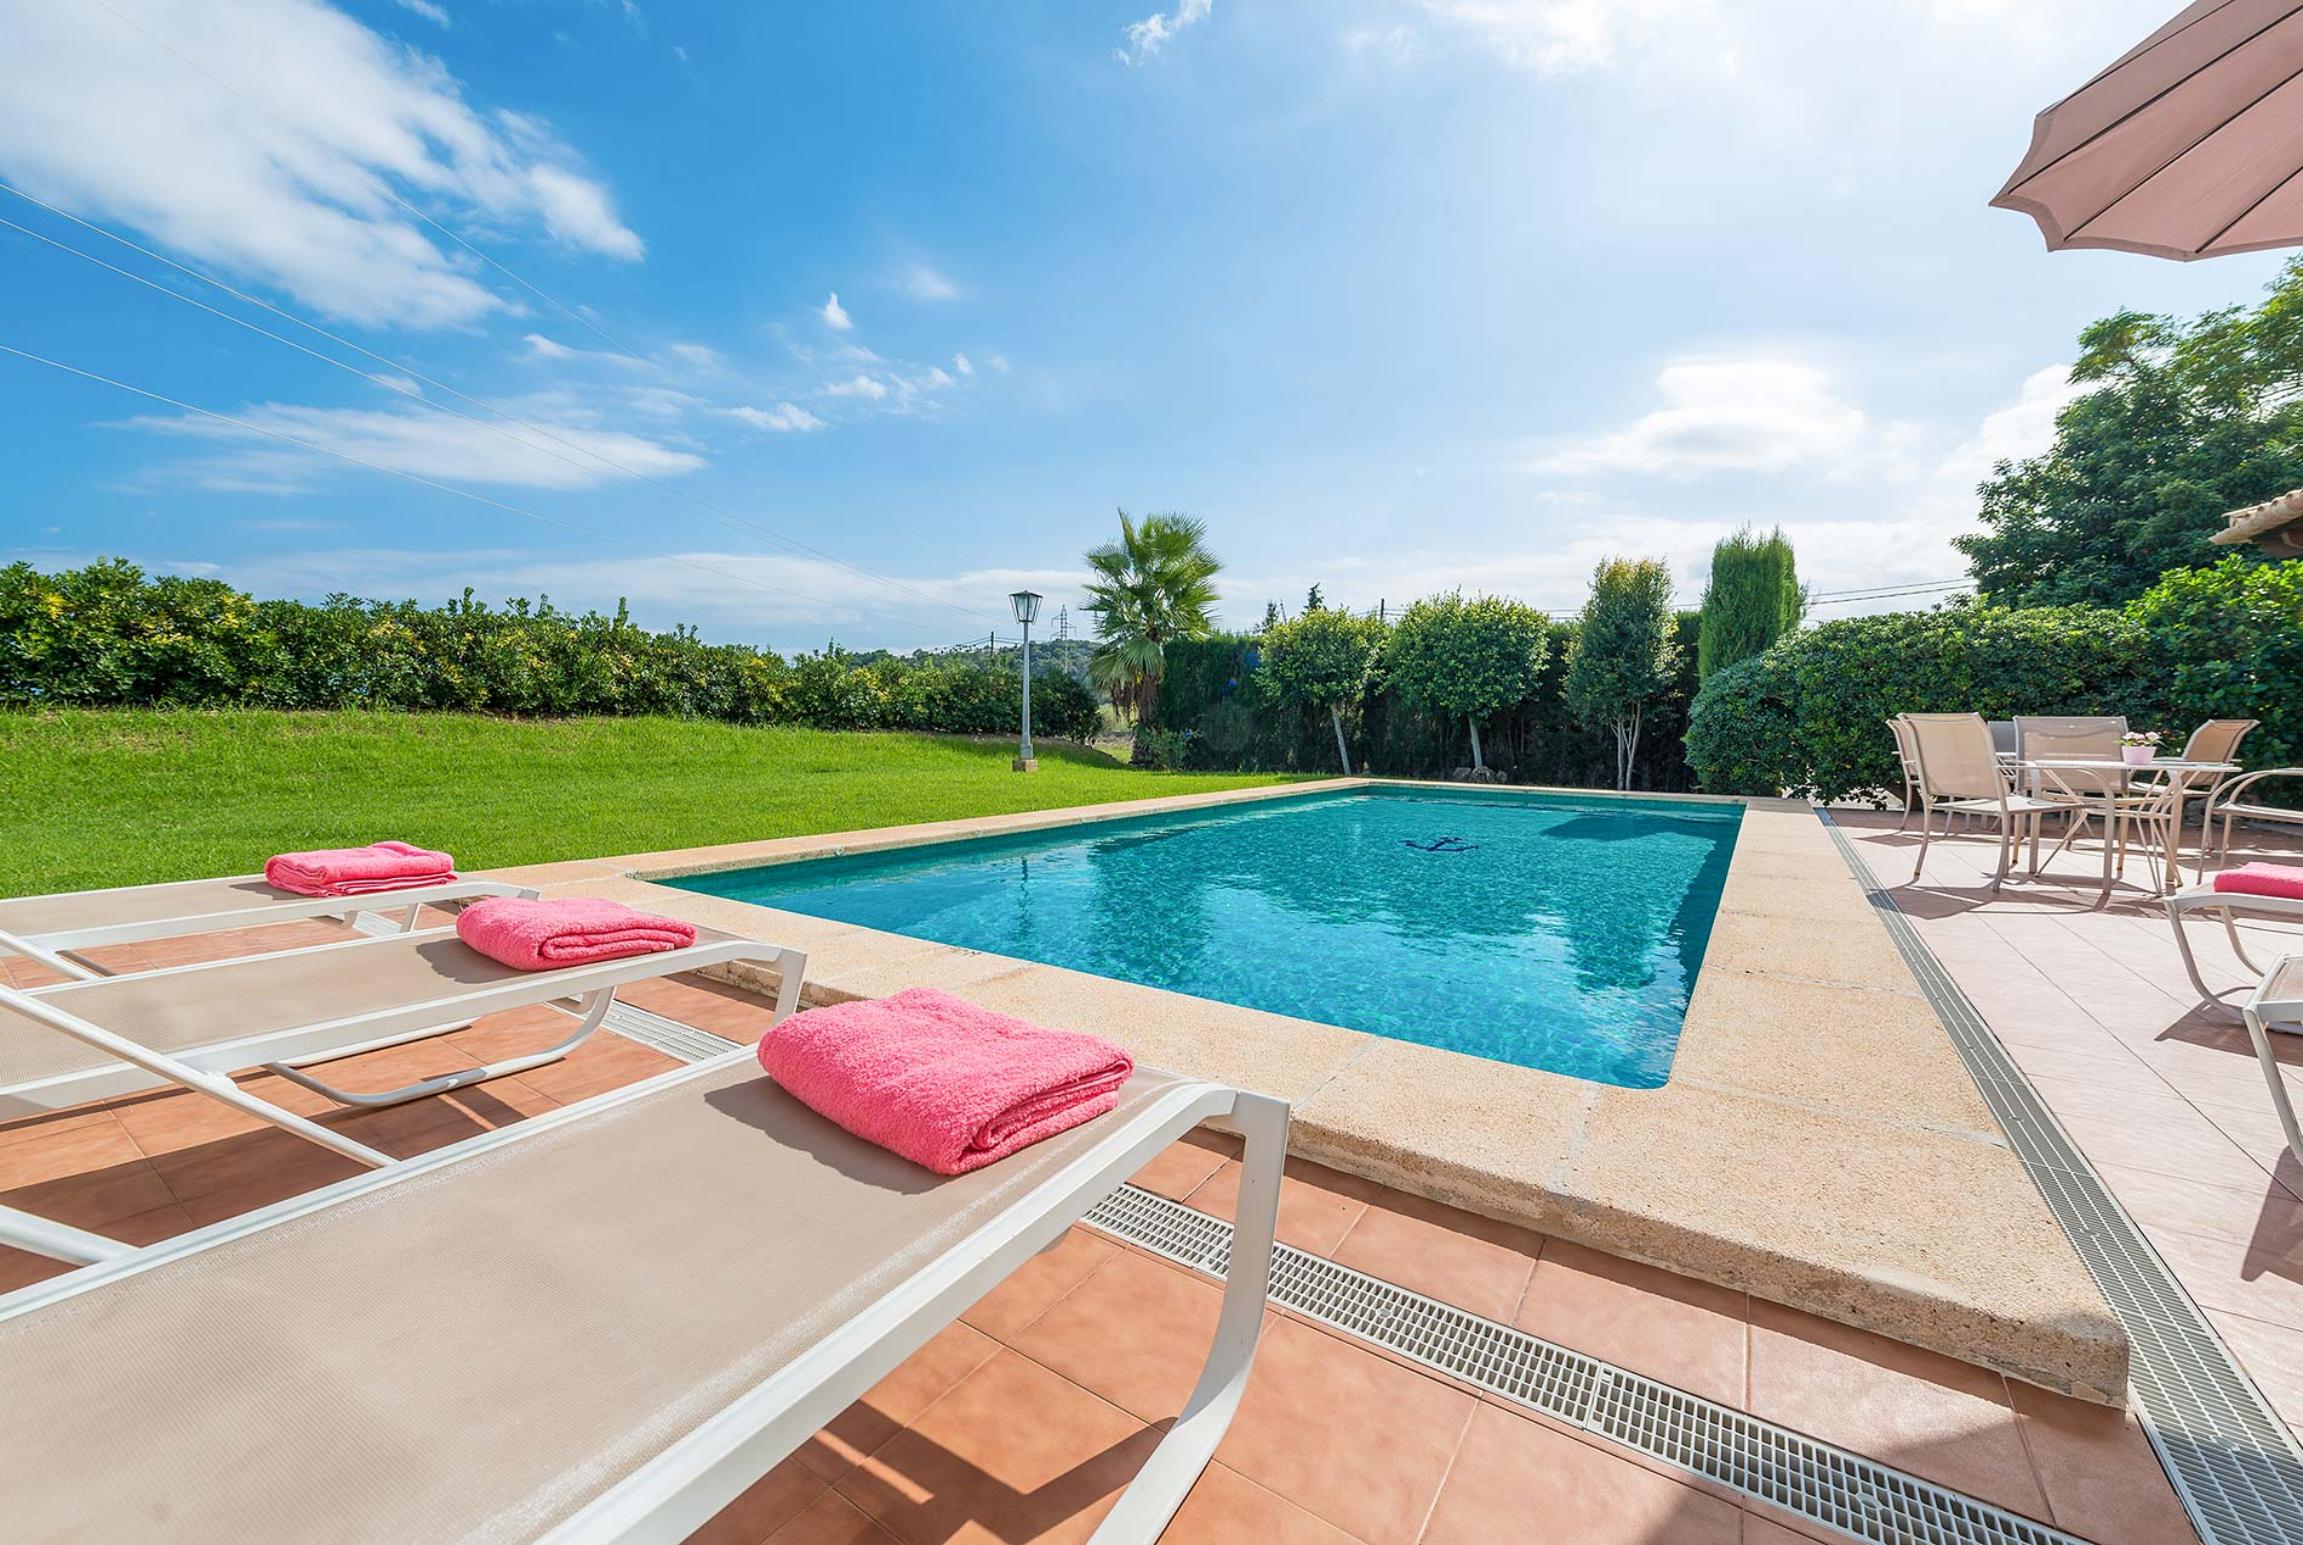 Property Image 2 - Attractive Villa in Pollensan Countryside with Pool